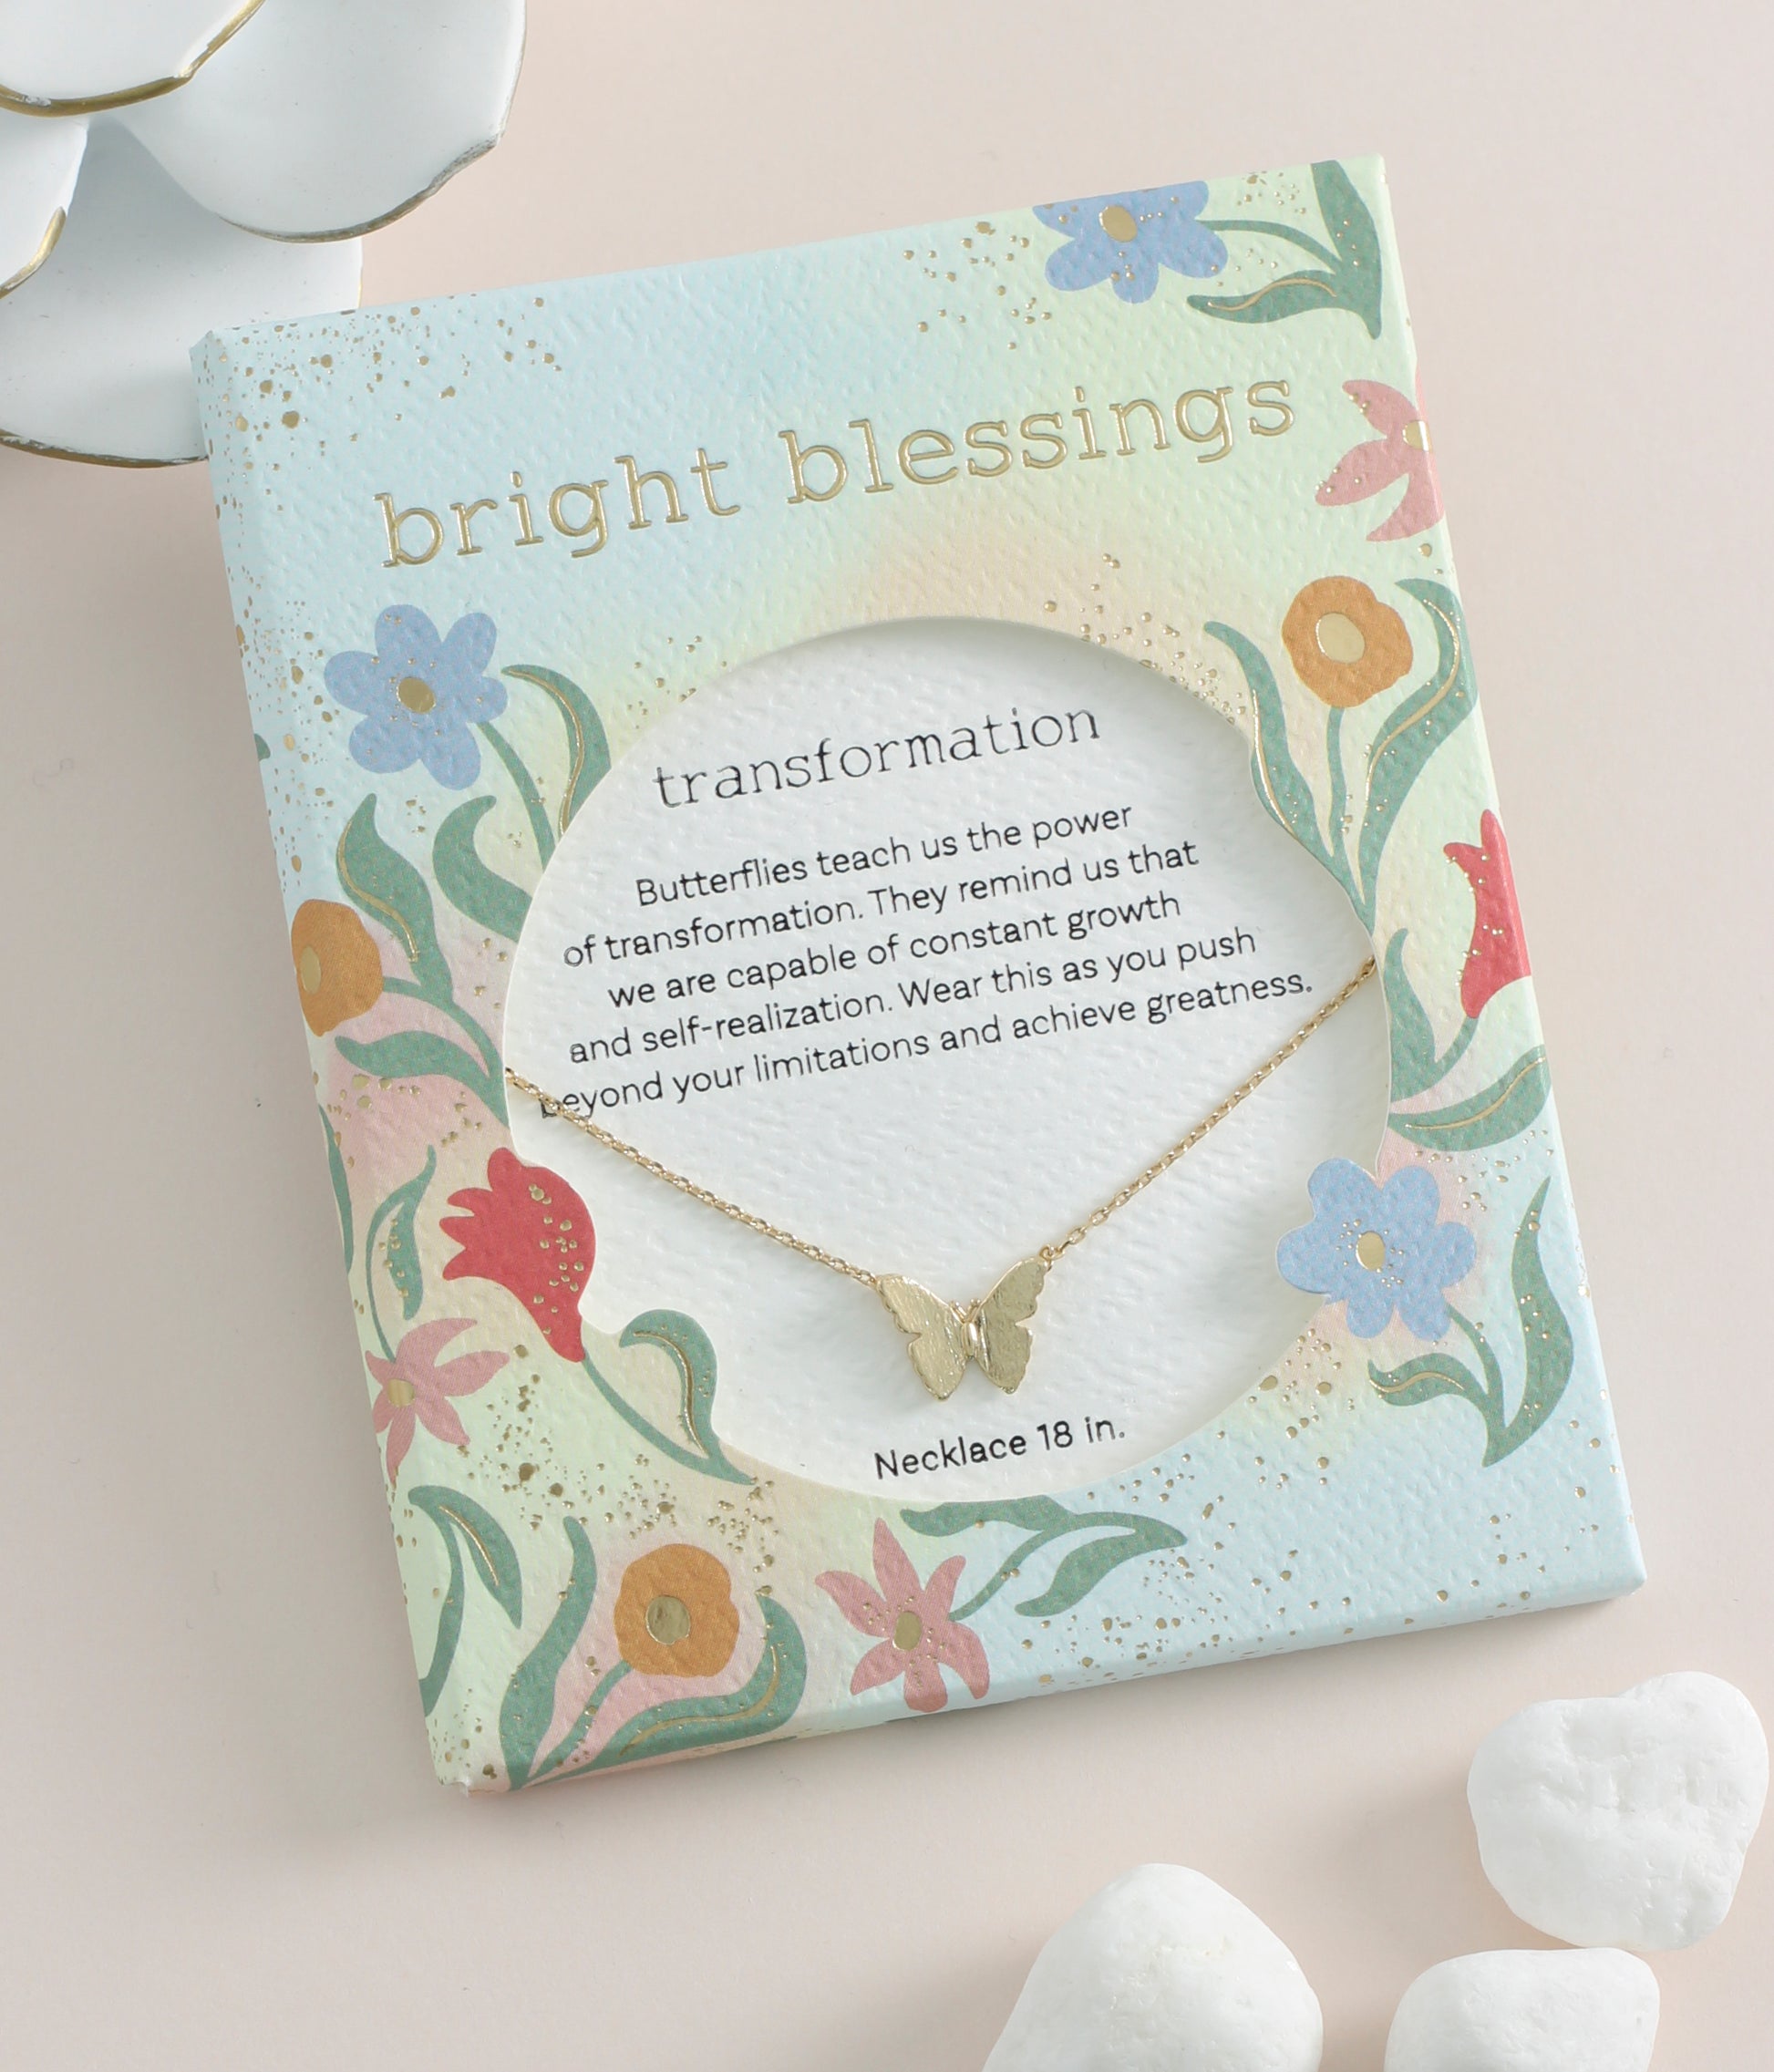 Bright Blessings Butterfly Gold Transformation Necklace Jewelry Periwinkle   